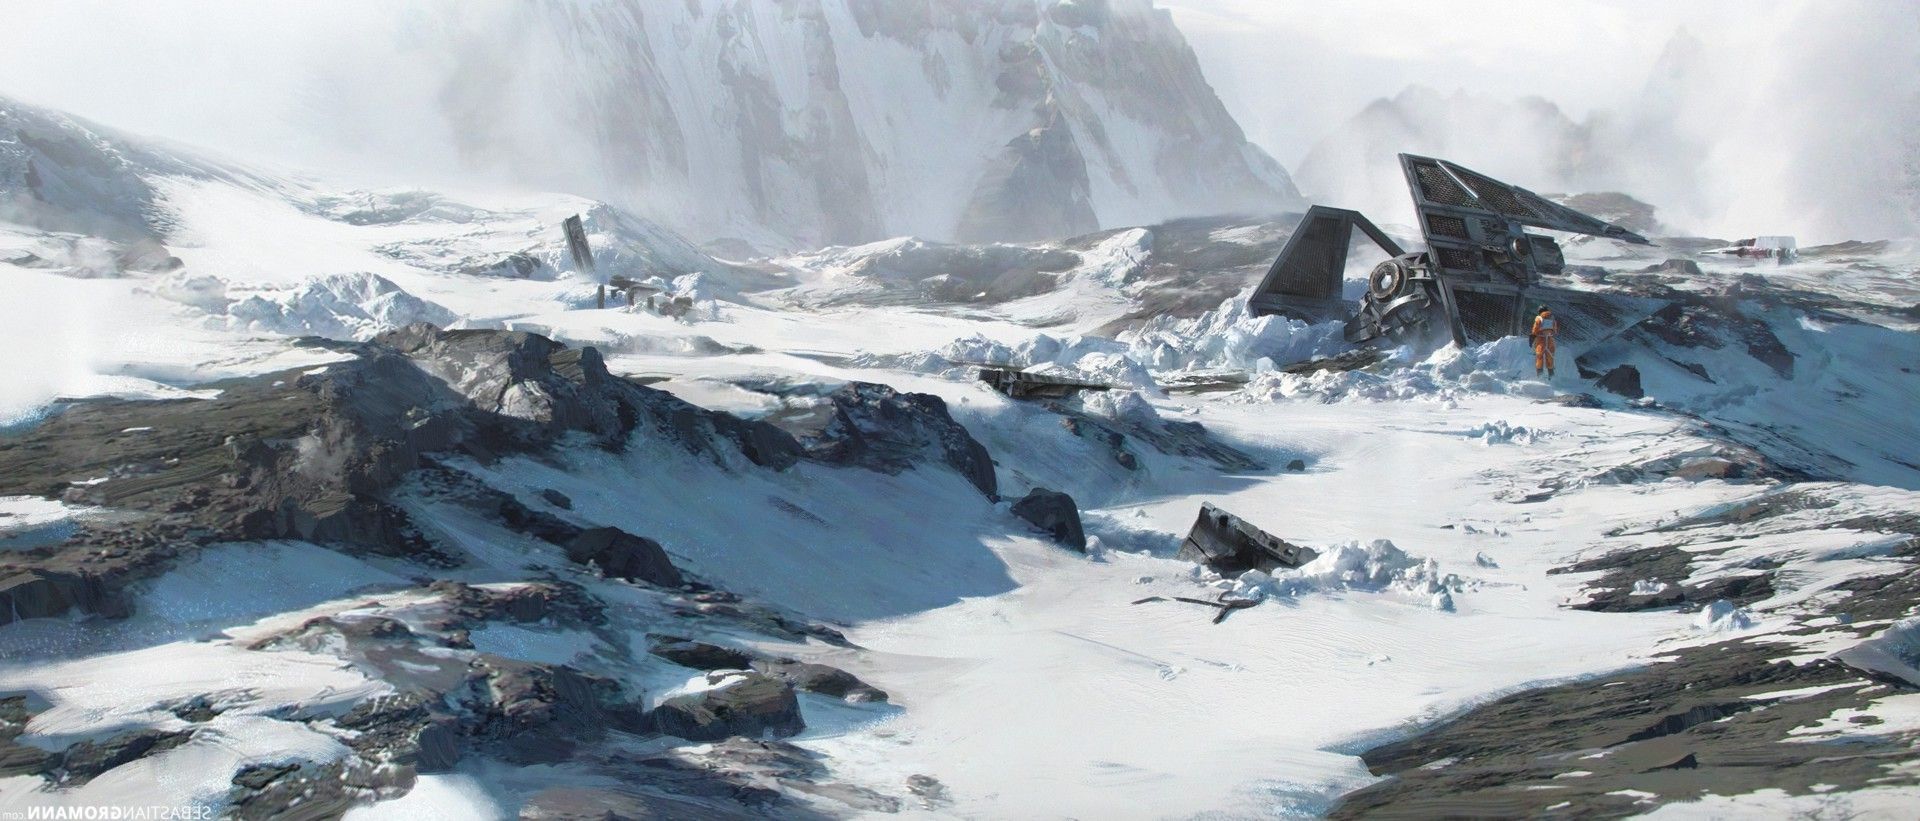 Hoth Wallpaper Free Hoth Background